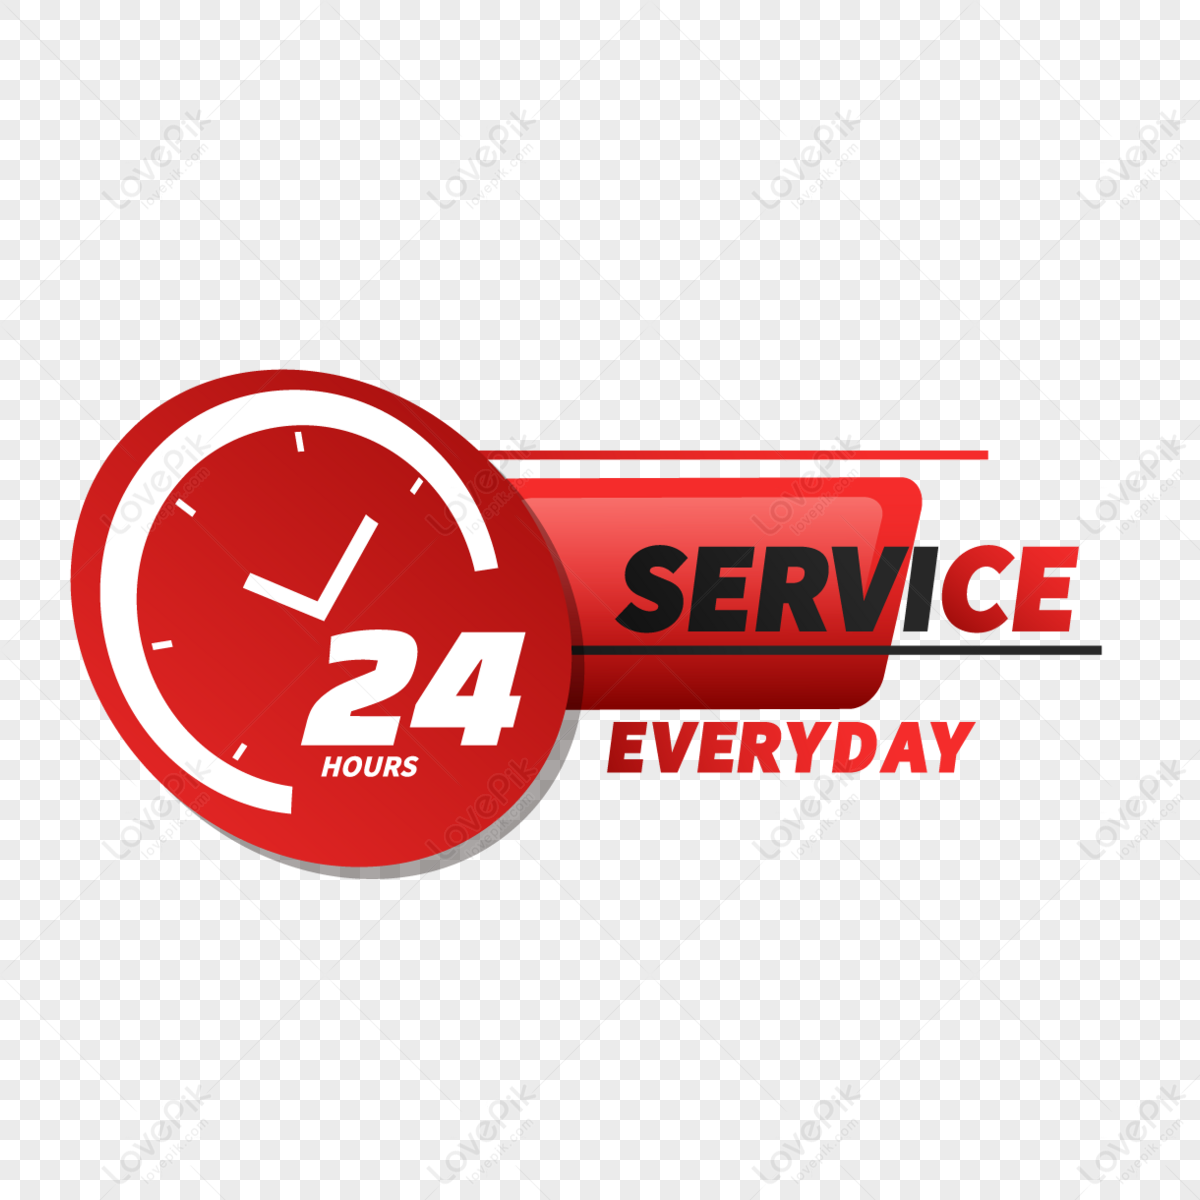 24 hour service - Free business icons